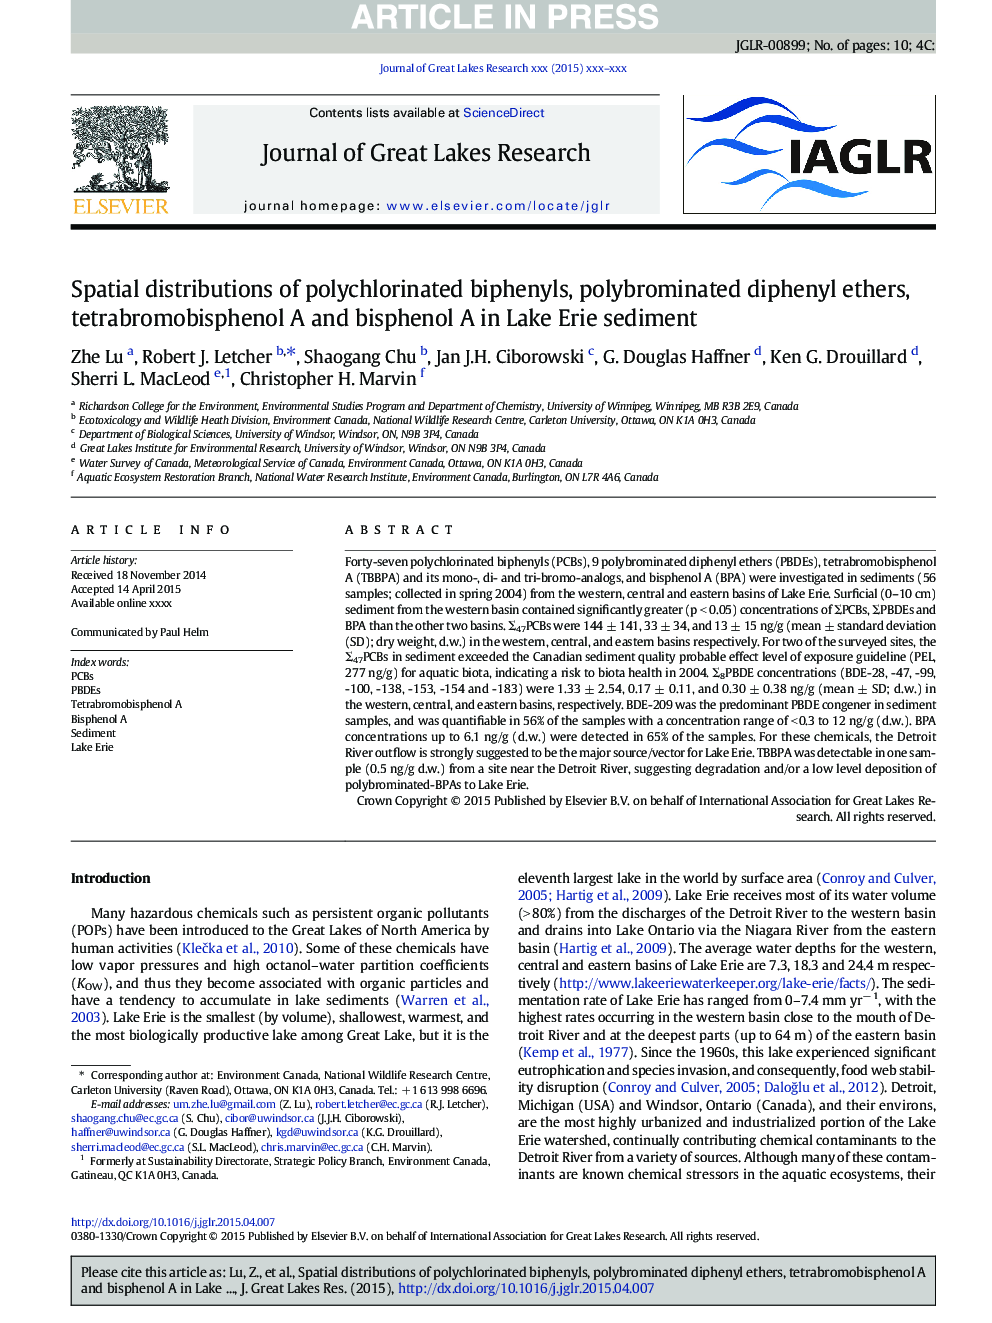 Spatial distributions of polychlorinated biphenyls, polybrominated diphenyl ethers, tetrabromobisphenol A and bisphenol A in Lake Erie sediment